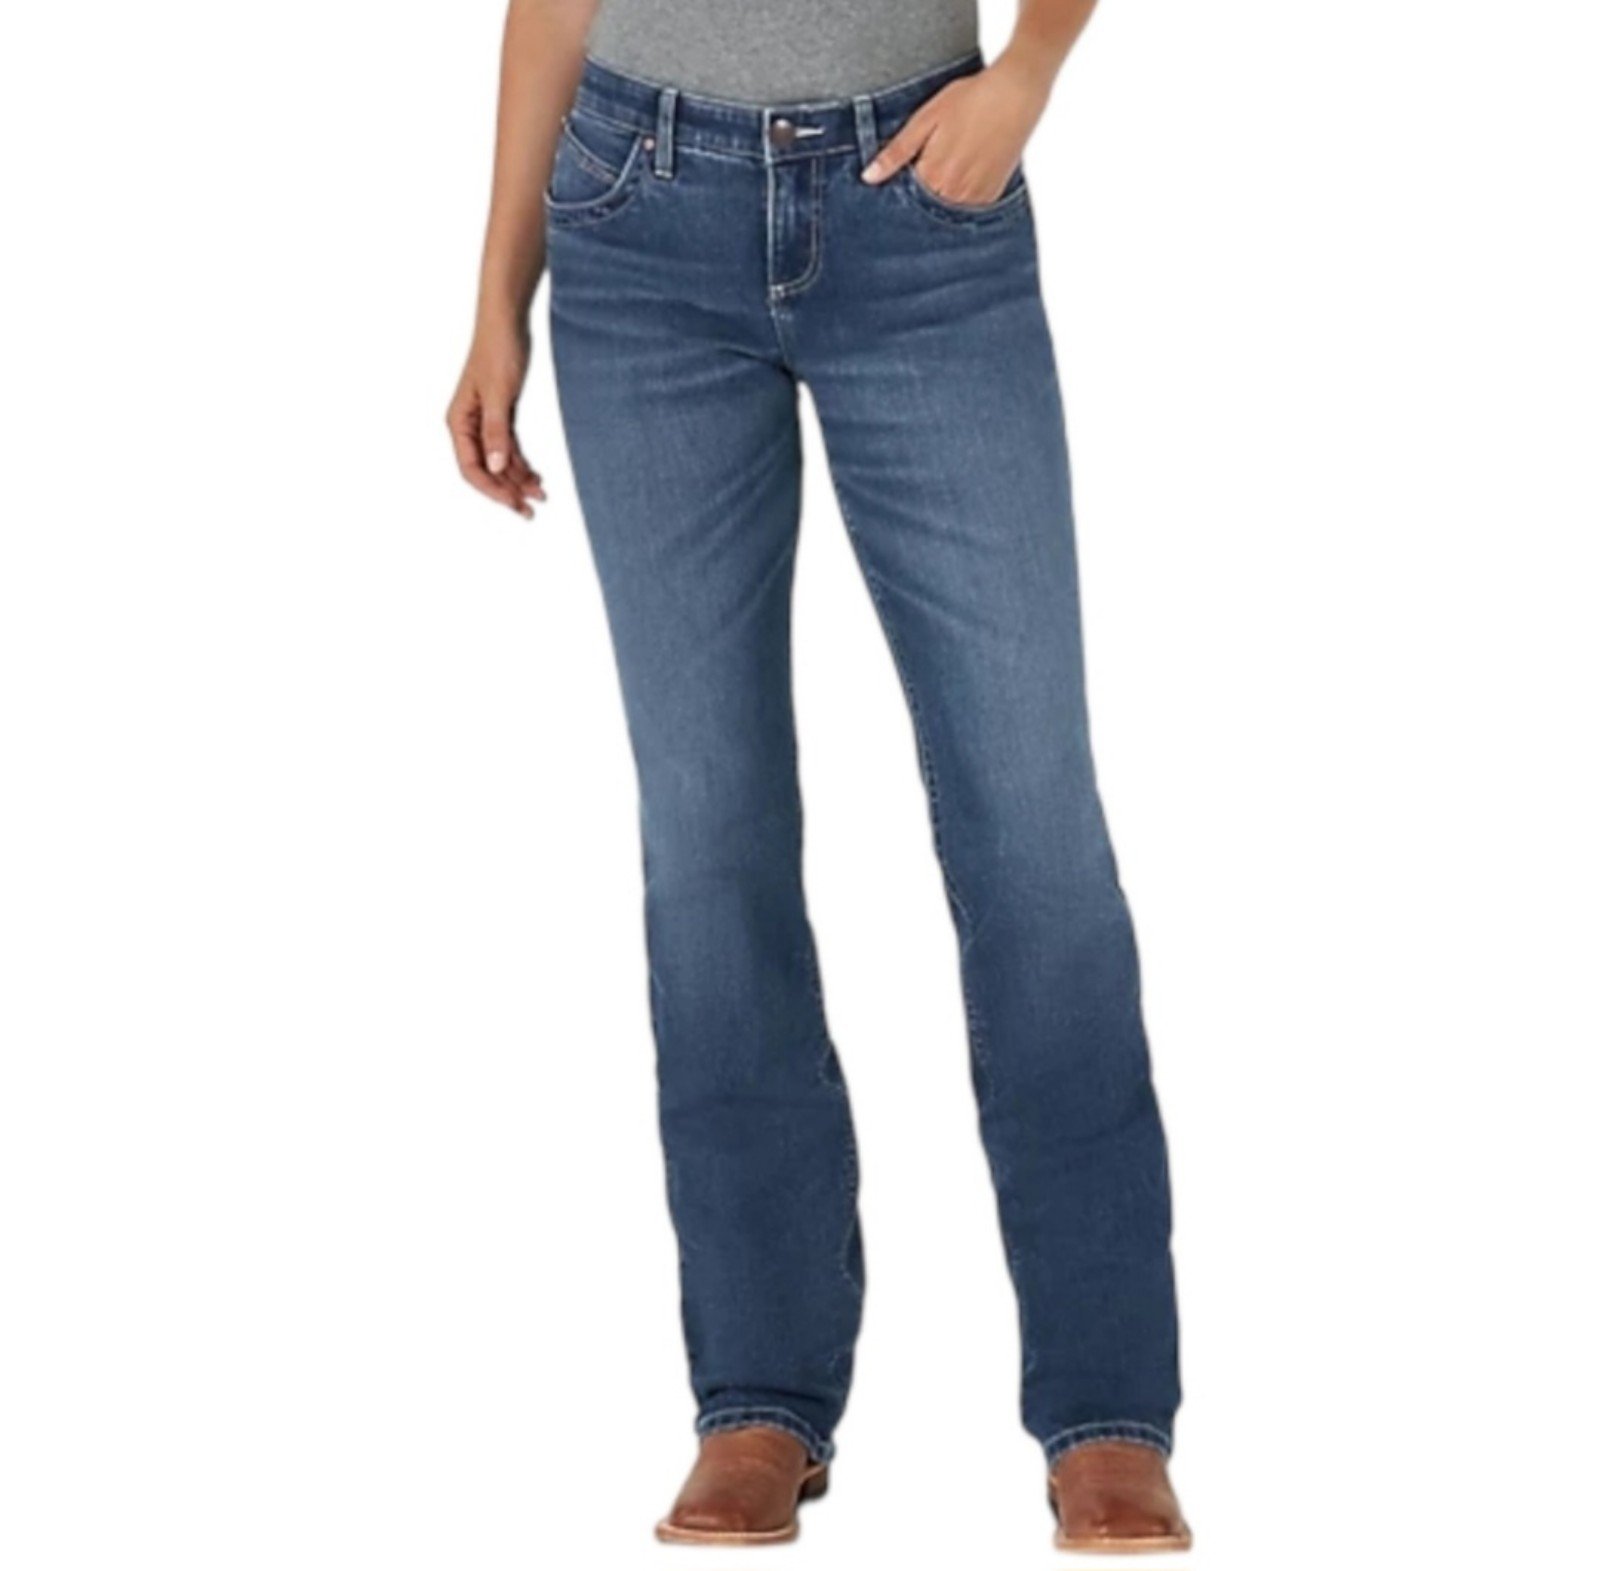 the Lowest price Wrangler Q-Baby Ultimate Riding Straight-Leg Jeans p7r0ktp6L just buy it